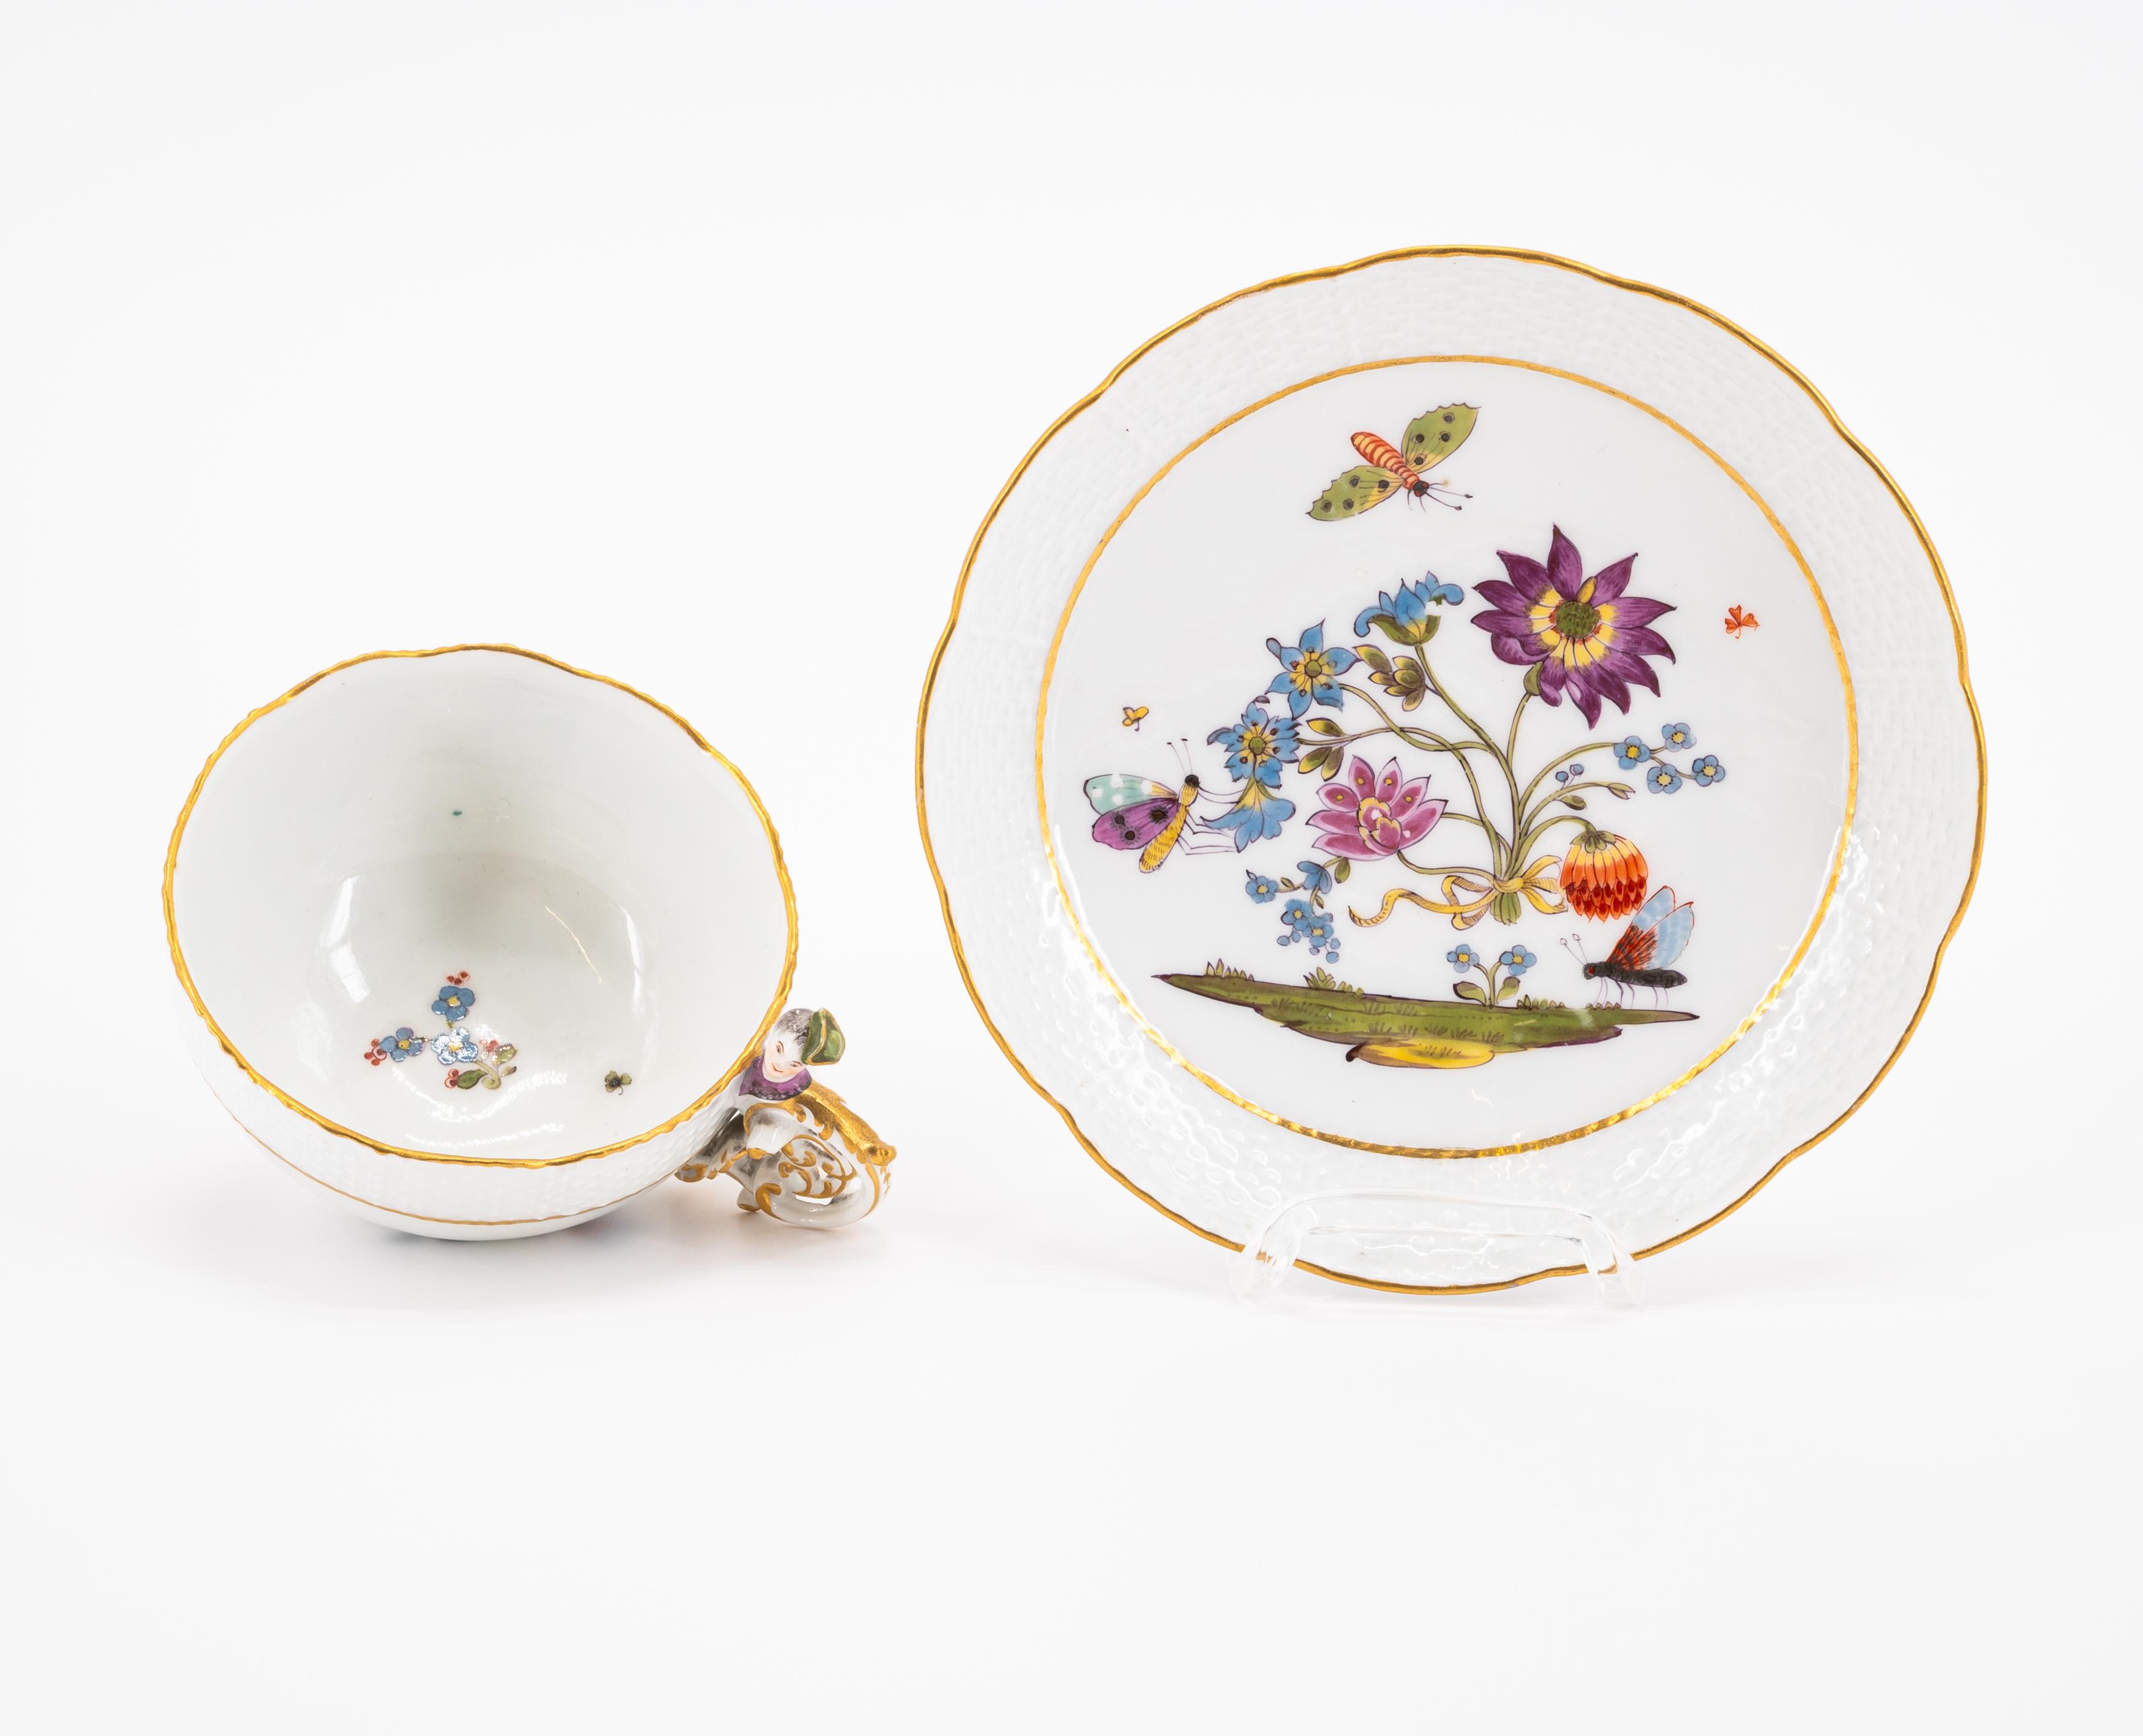 PORCELAIN COFFEE POT, CUP AND SAUCER WITH BUTTERFLY DECOR - Image 5 of 11